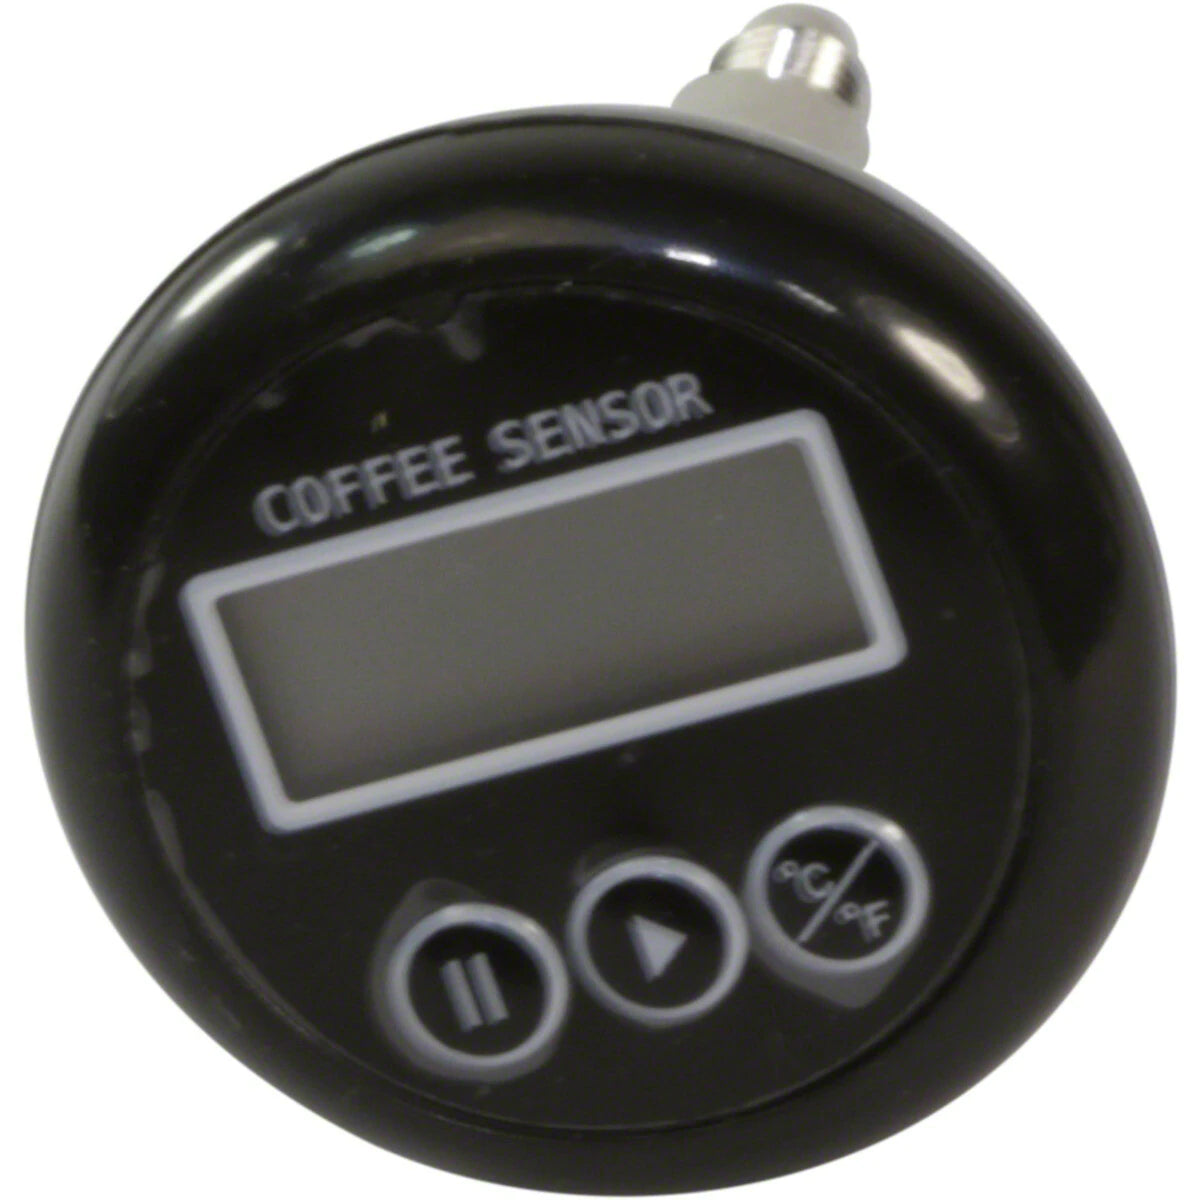 https://www.caffetechz.shop/wp-content/uploads/1697/26/best-cheapest-coffee-sensor-thermometer-for-exposed-e-61-grouphead-with-cheapest-price_0.webp